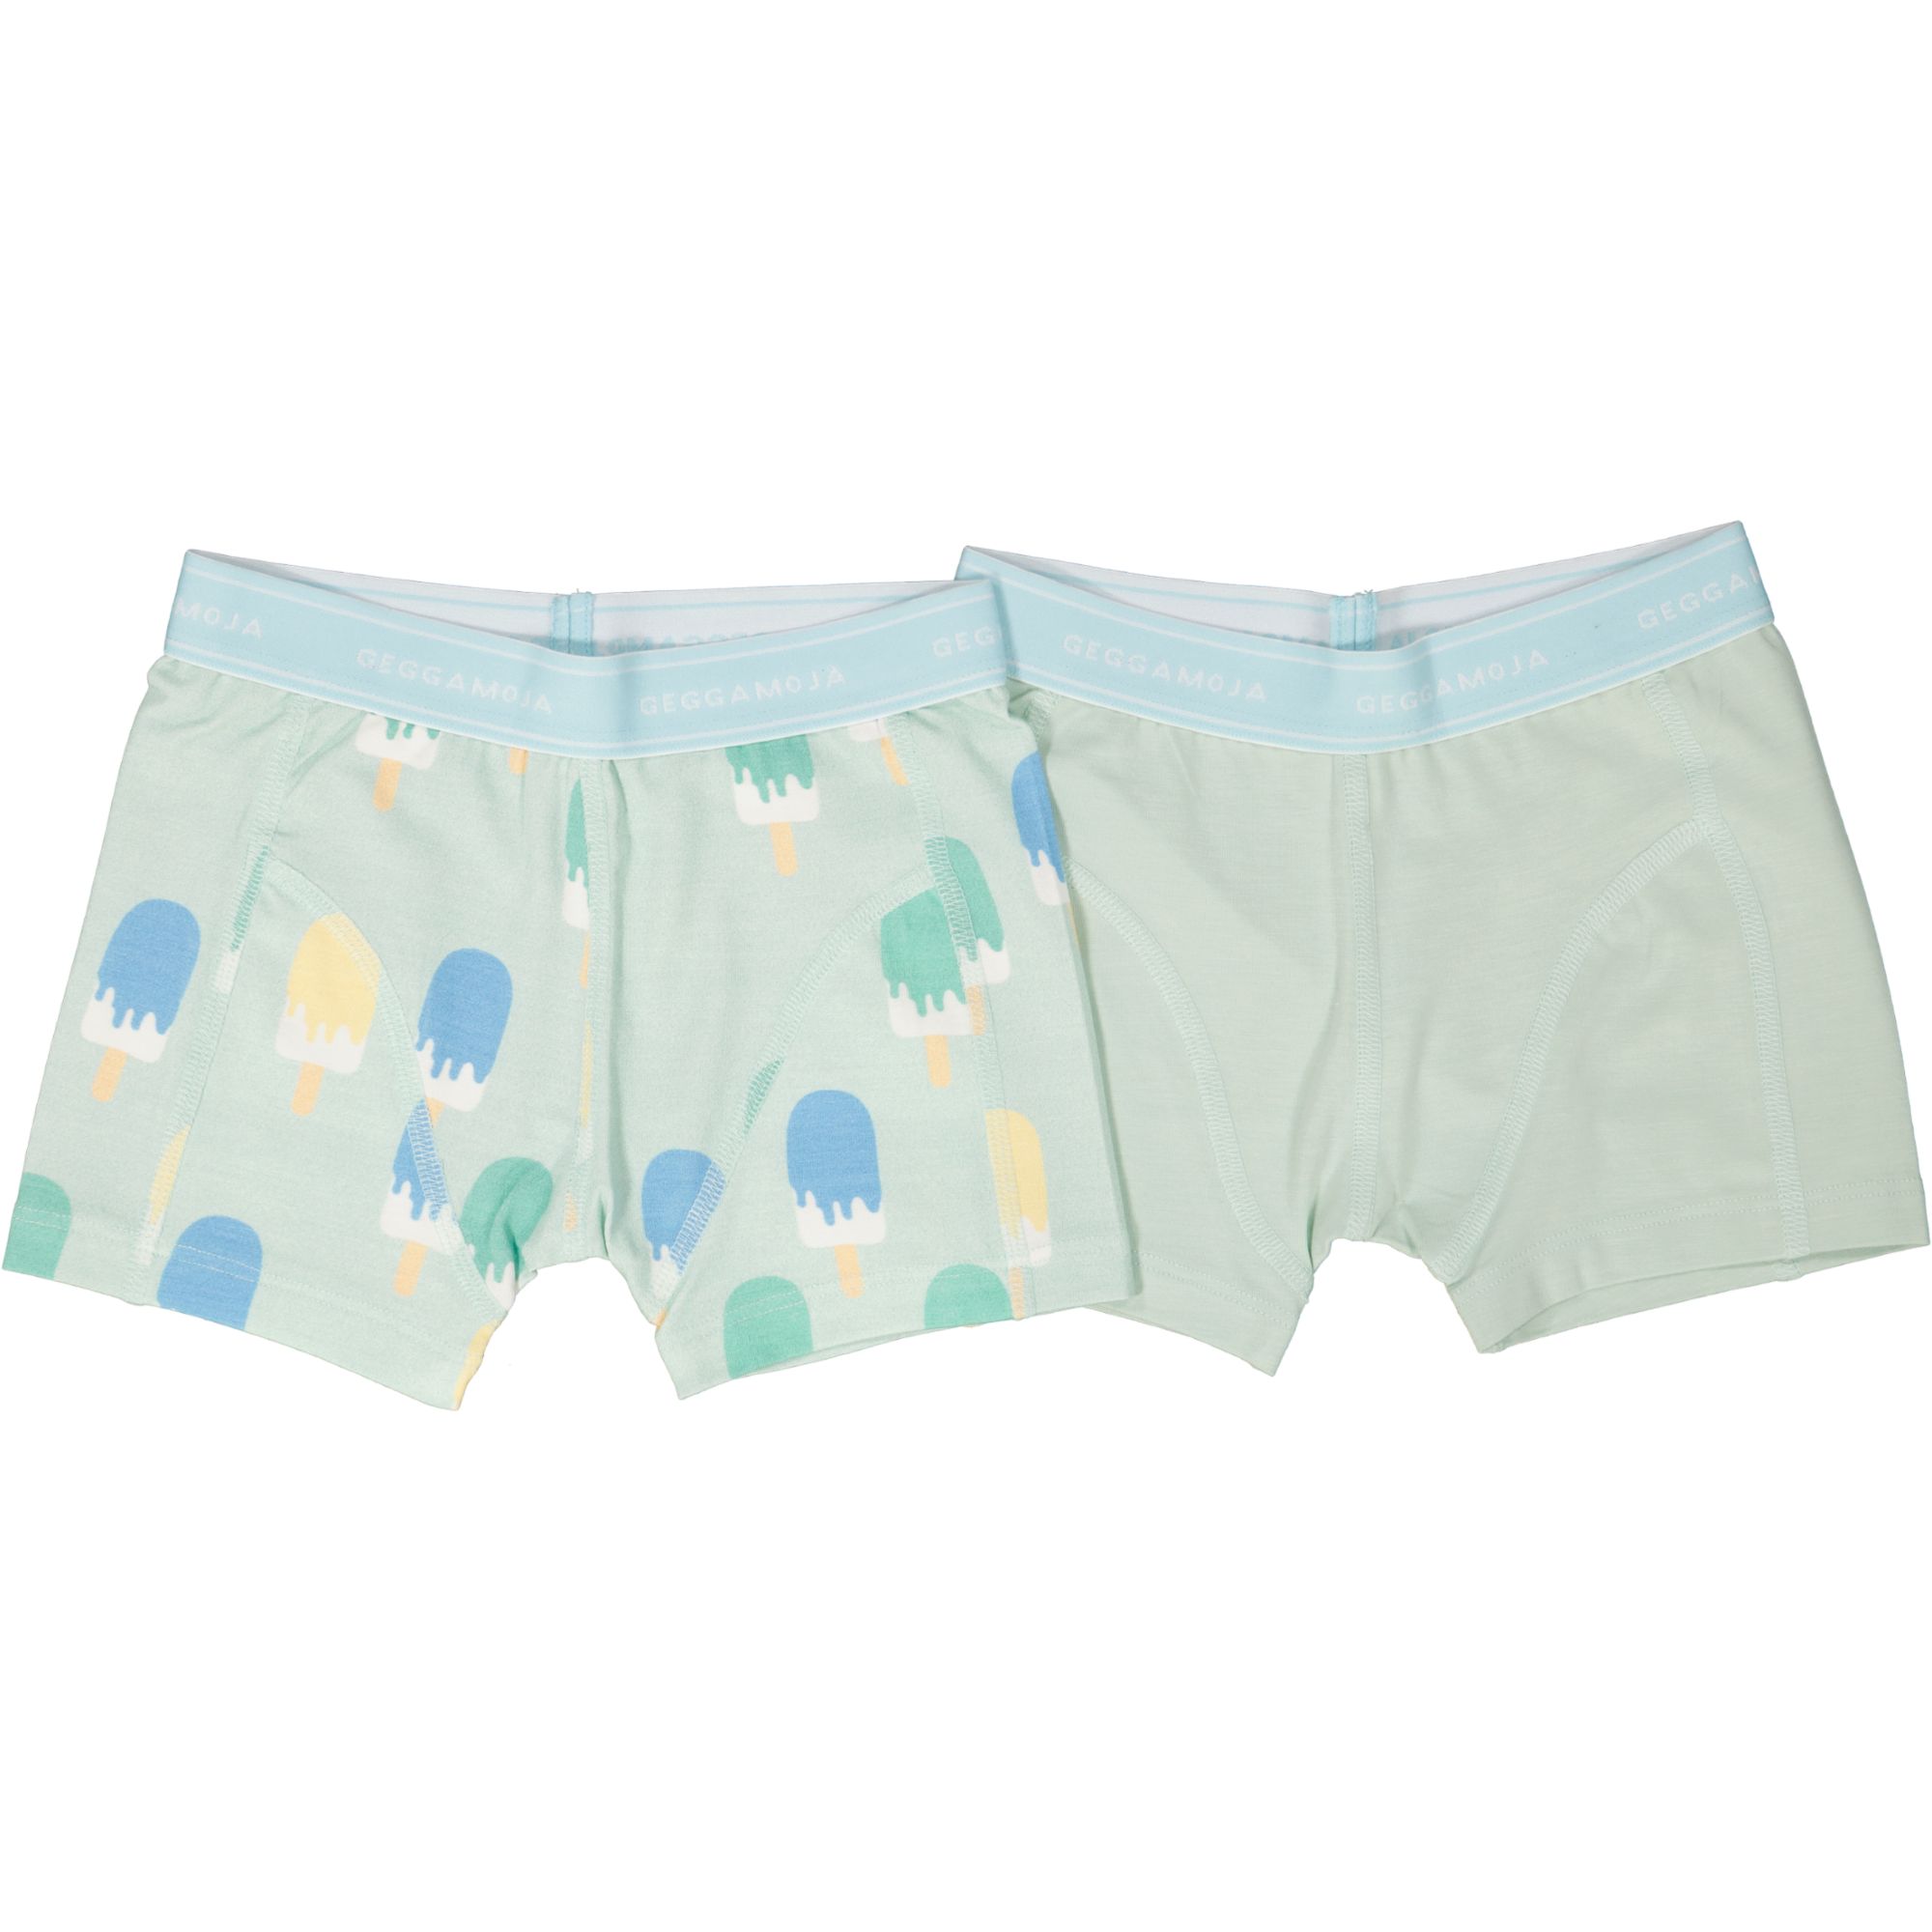 Bamboo boxer 2-pack Ice cream mint